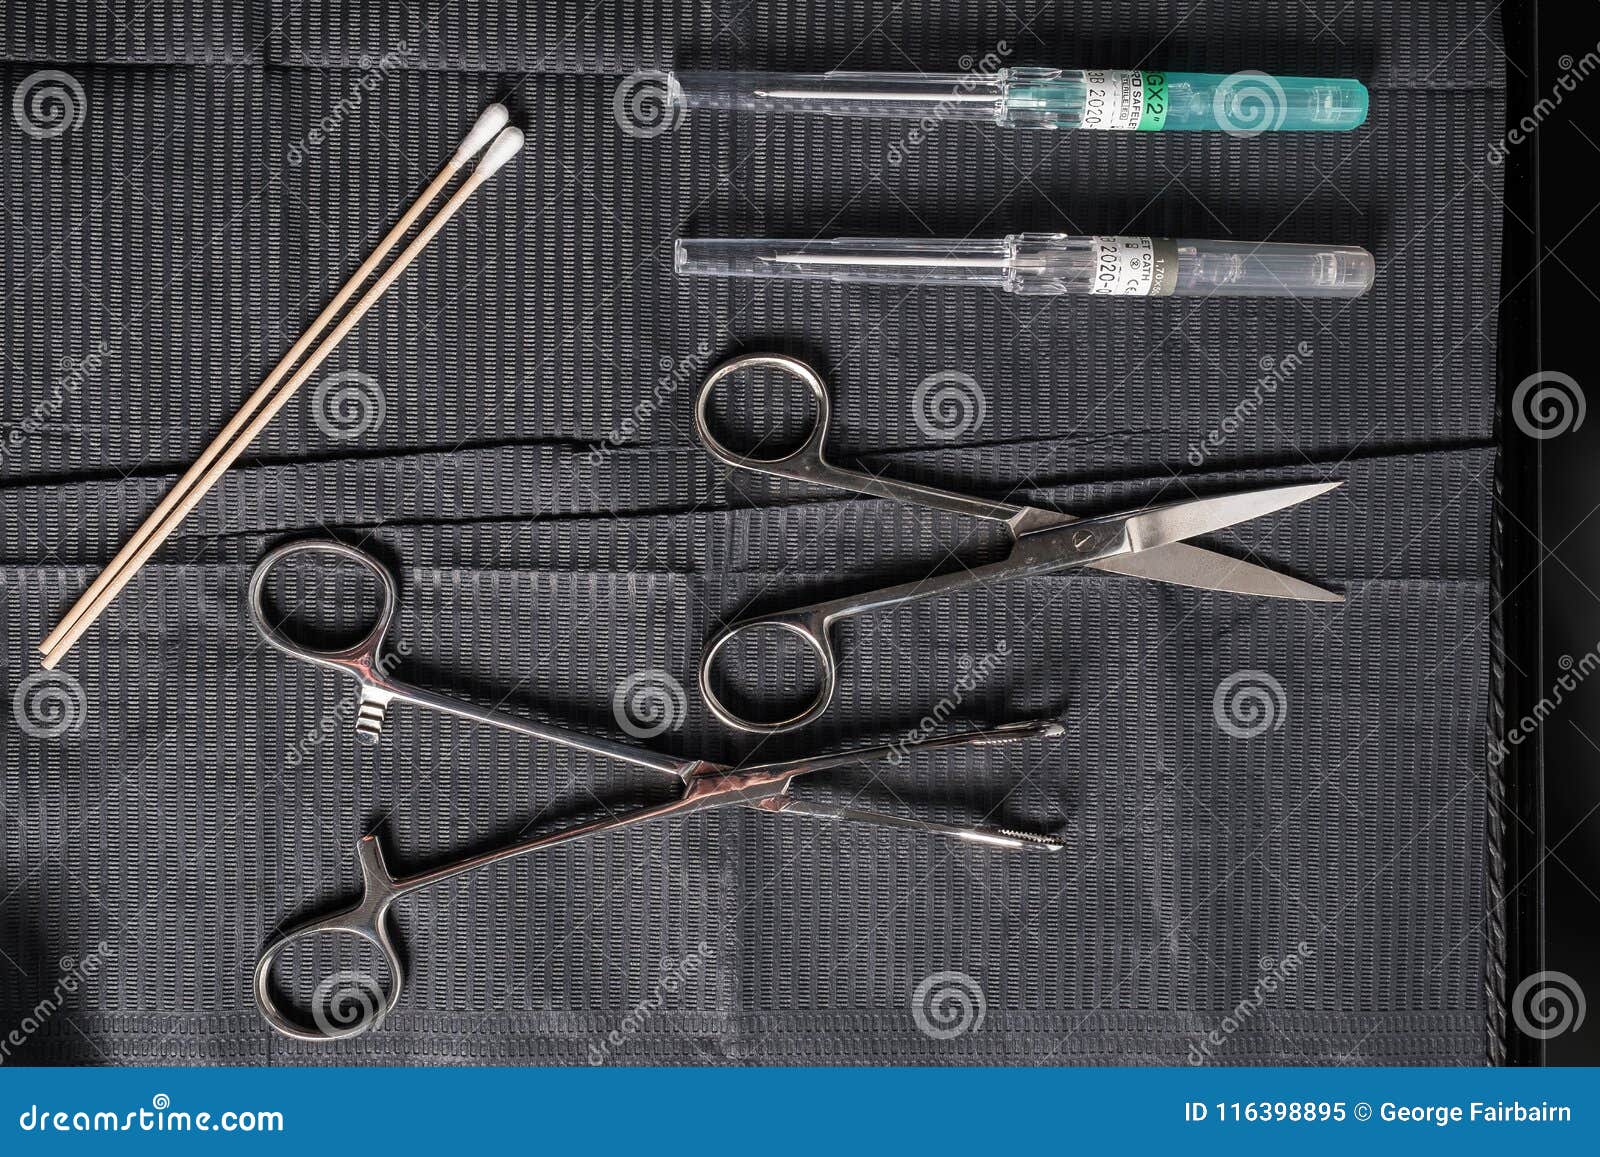 Body Piercing Equipment on a Sterile Mat in a Tattoo Shop Stock Image ...